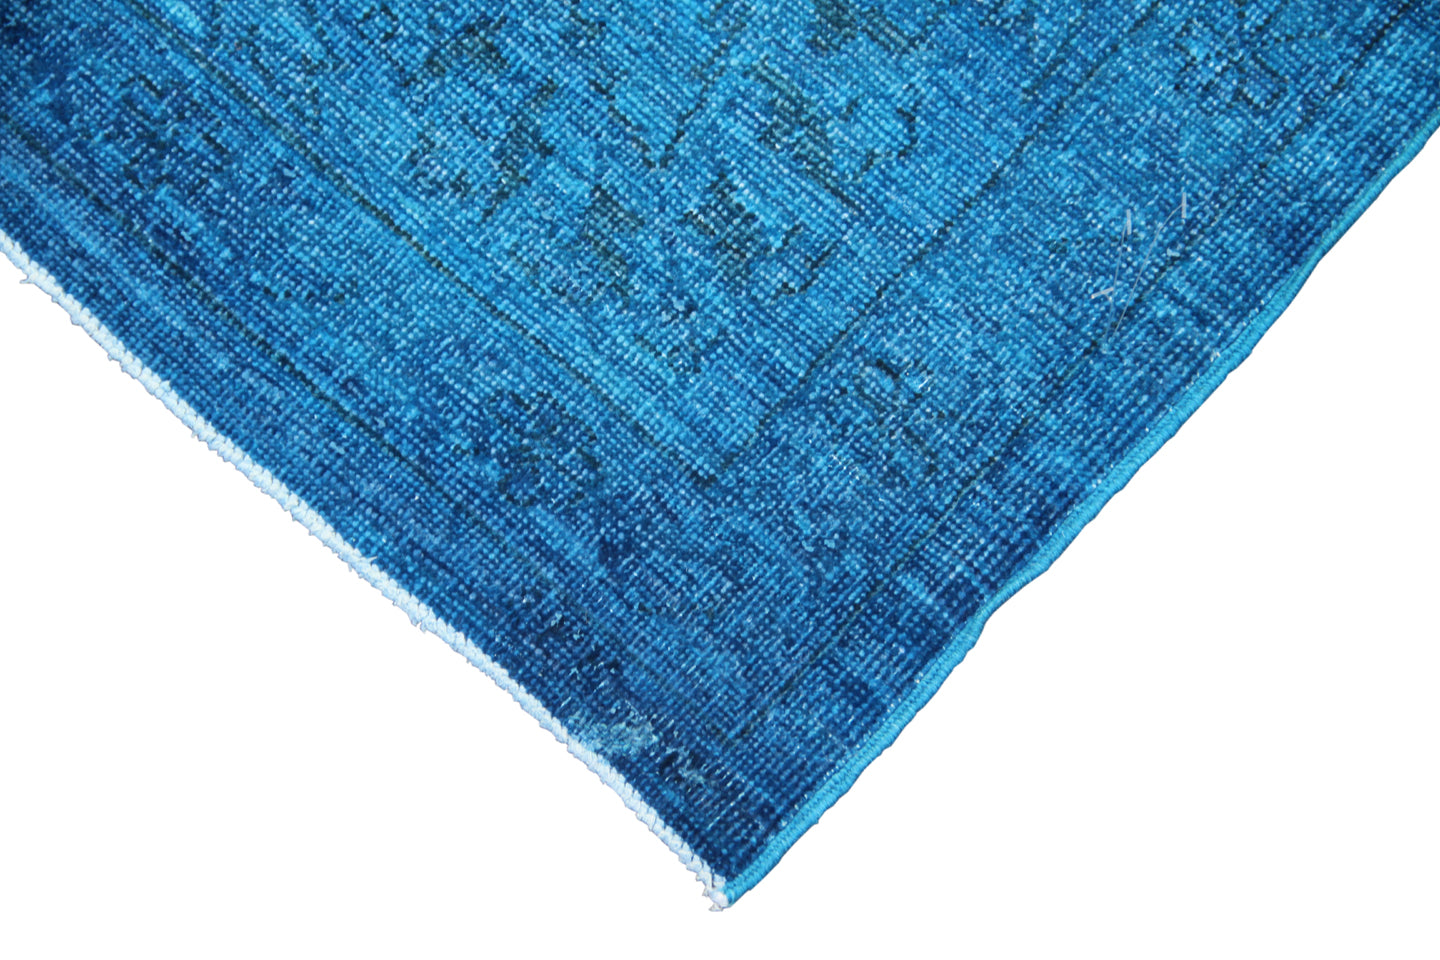 8'x10' Blue Persian Tabriz Design Hand-Knotted Ariana Overdyed Area Rug